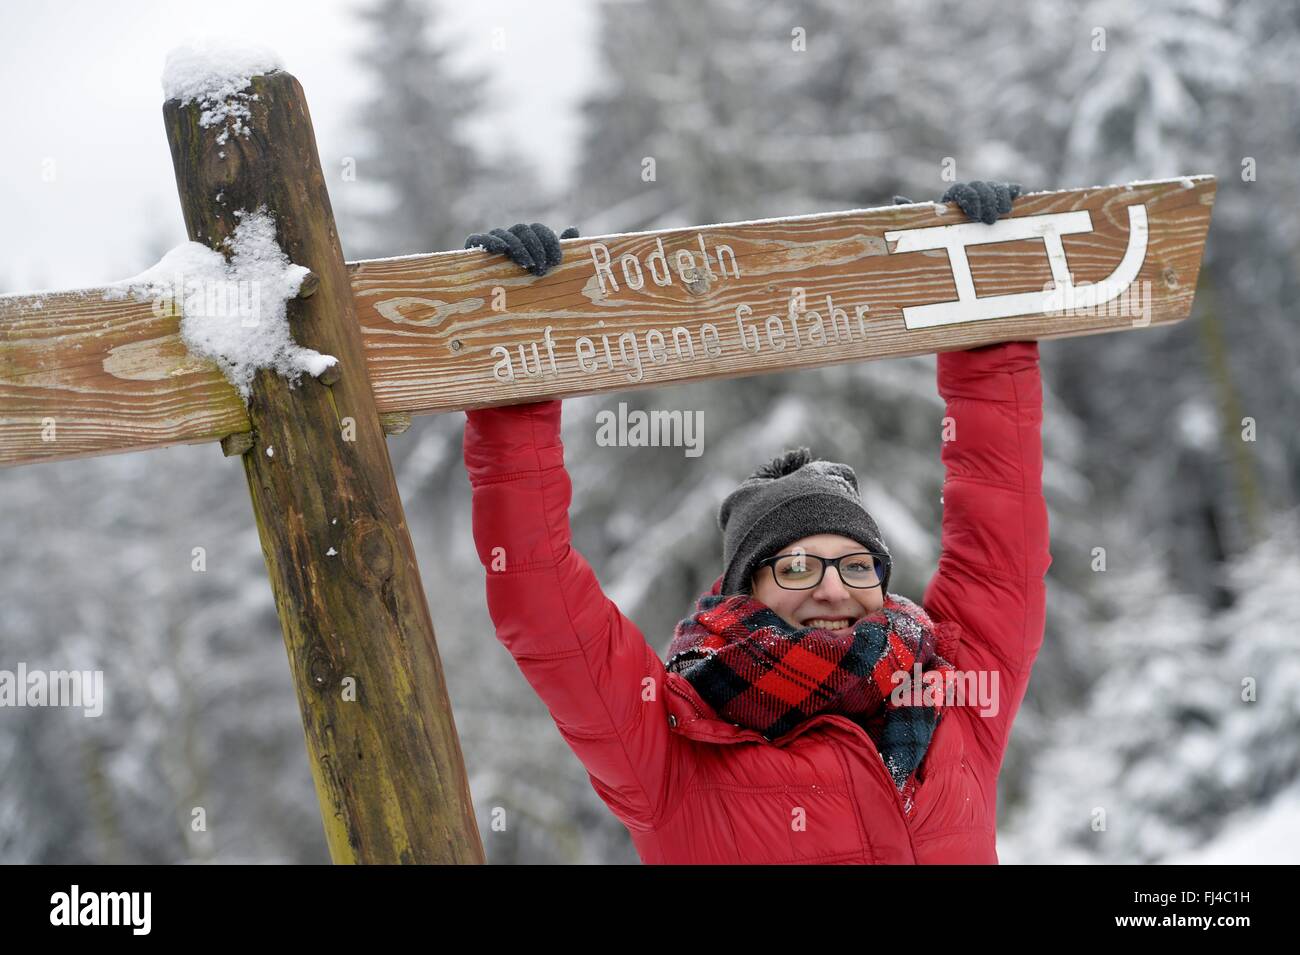 A young woman in the snow, Germany, city of Sonnenberg, 18. February 2016. Photo: Frank May Stock Photo